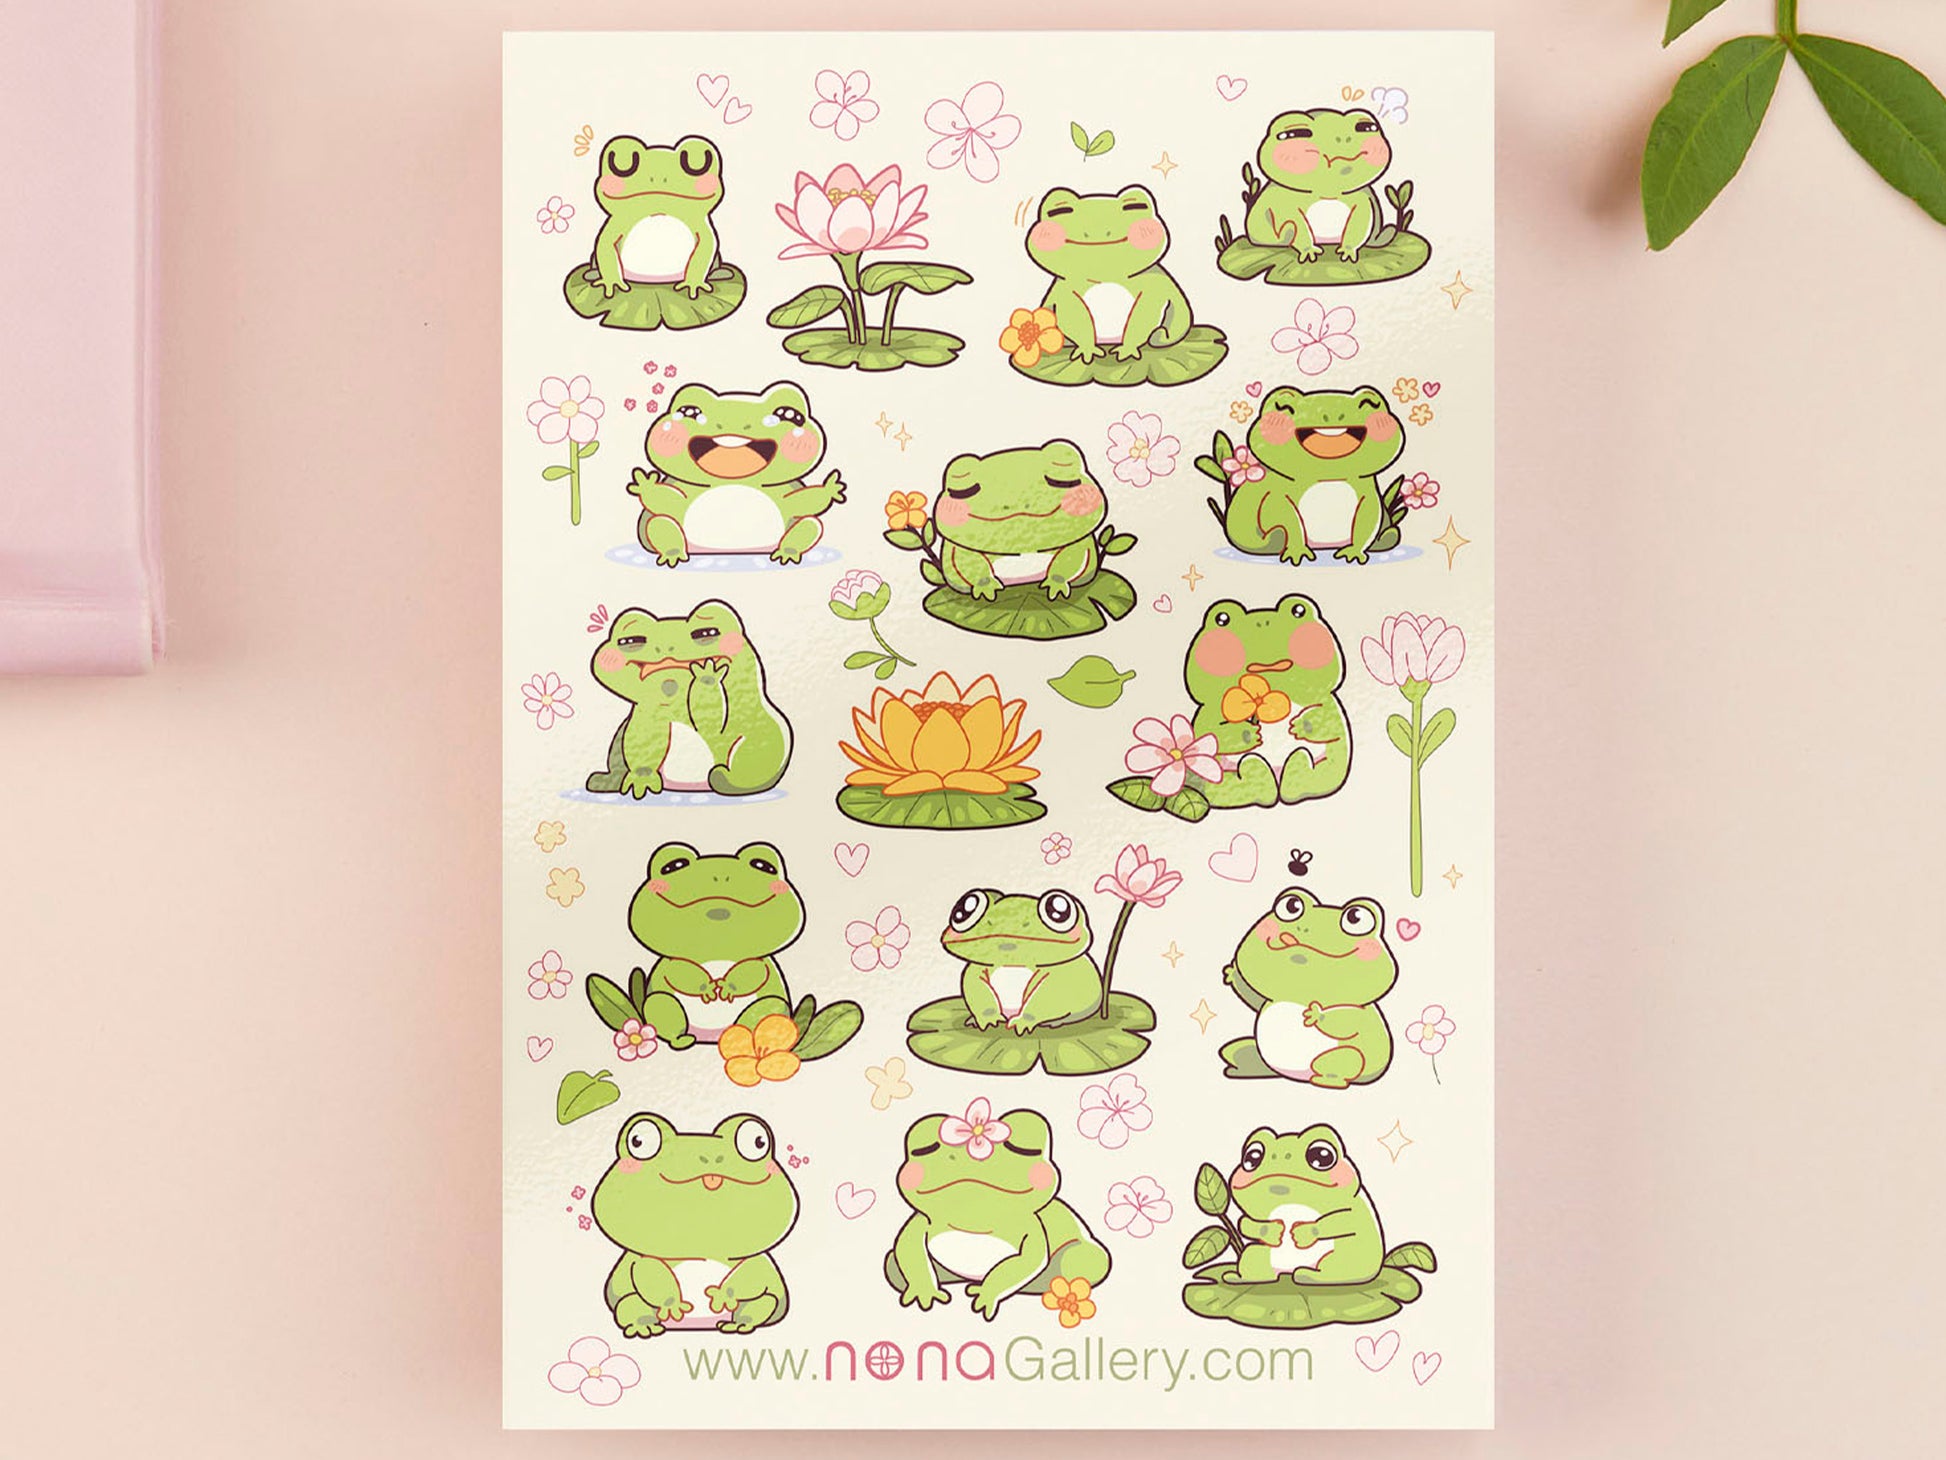 A large pastel coloured gloss vinyl sticker sheet with multiple cute frogs and lily pad stickers